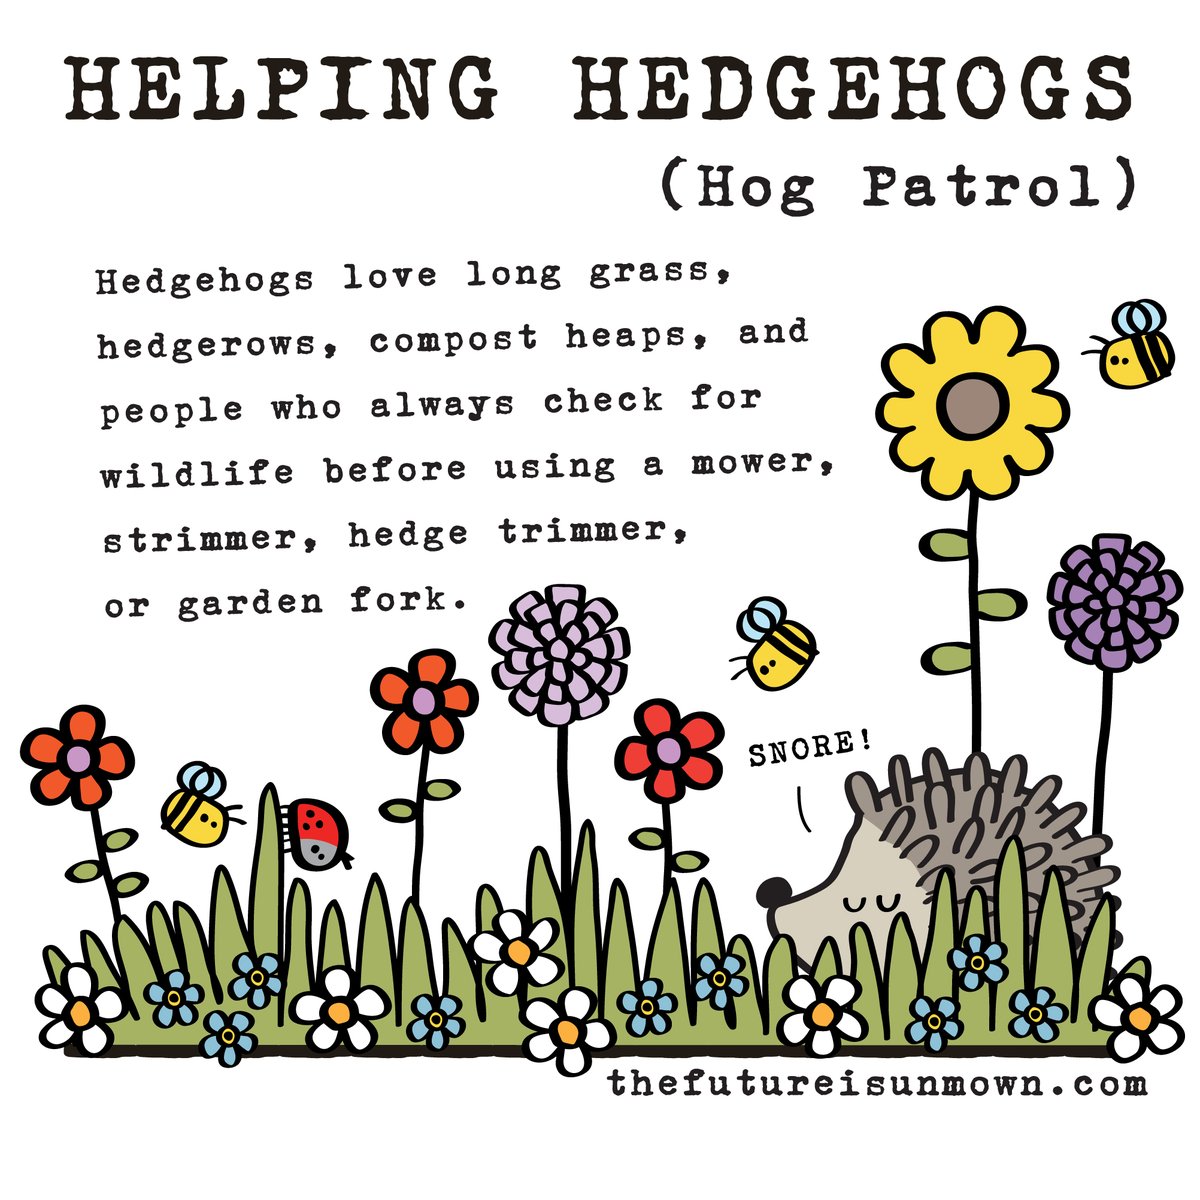 Thought I'd pop this design up as we enter garden spring cleaning season... not that we do much of it at our place 😆🦔💚 #watchoutforwildlife #helpinghedgehogs #wildlifegarden #springcleaning #leavetheleaves #wildcorner #thefutureisunmown